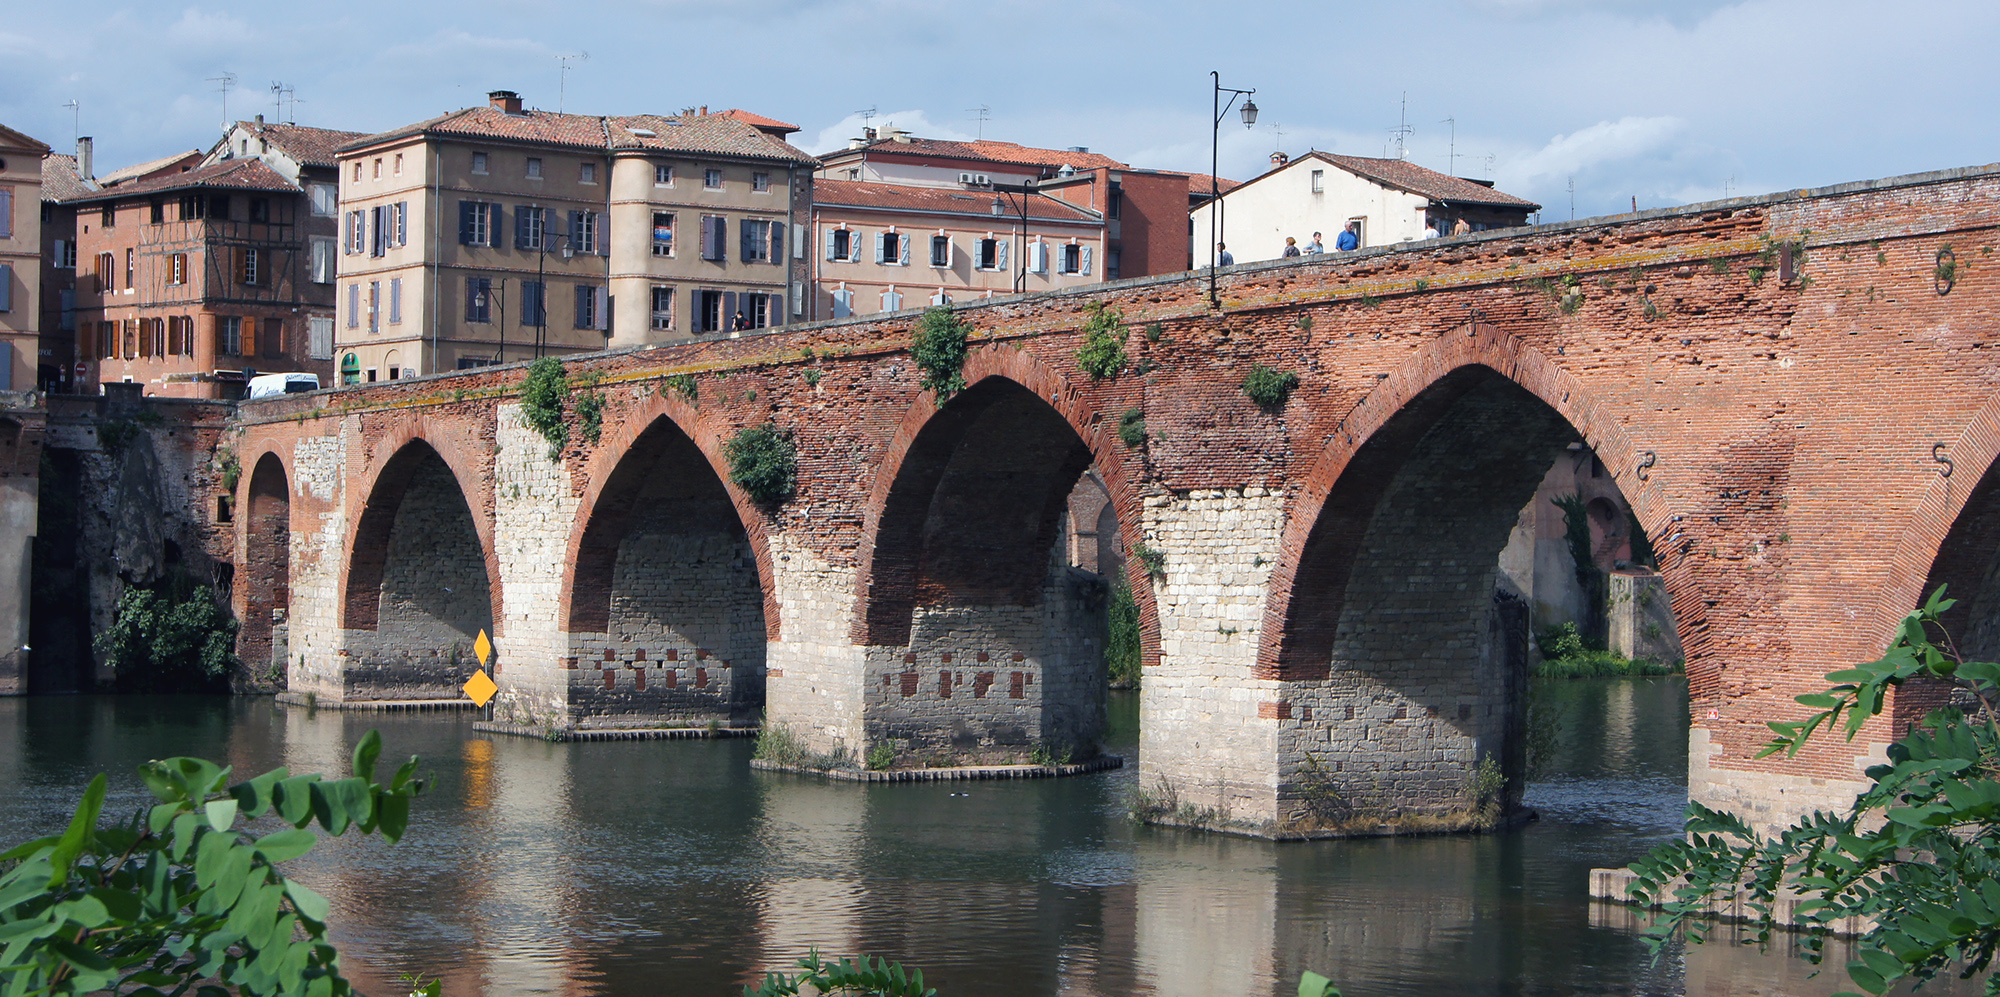 Enlarged view: Pont Vieux in Albi